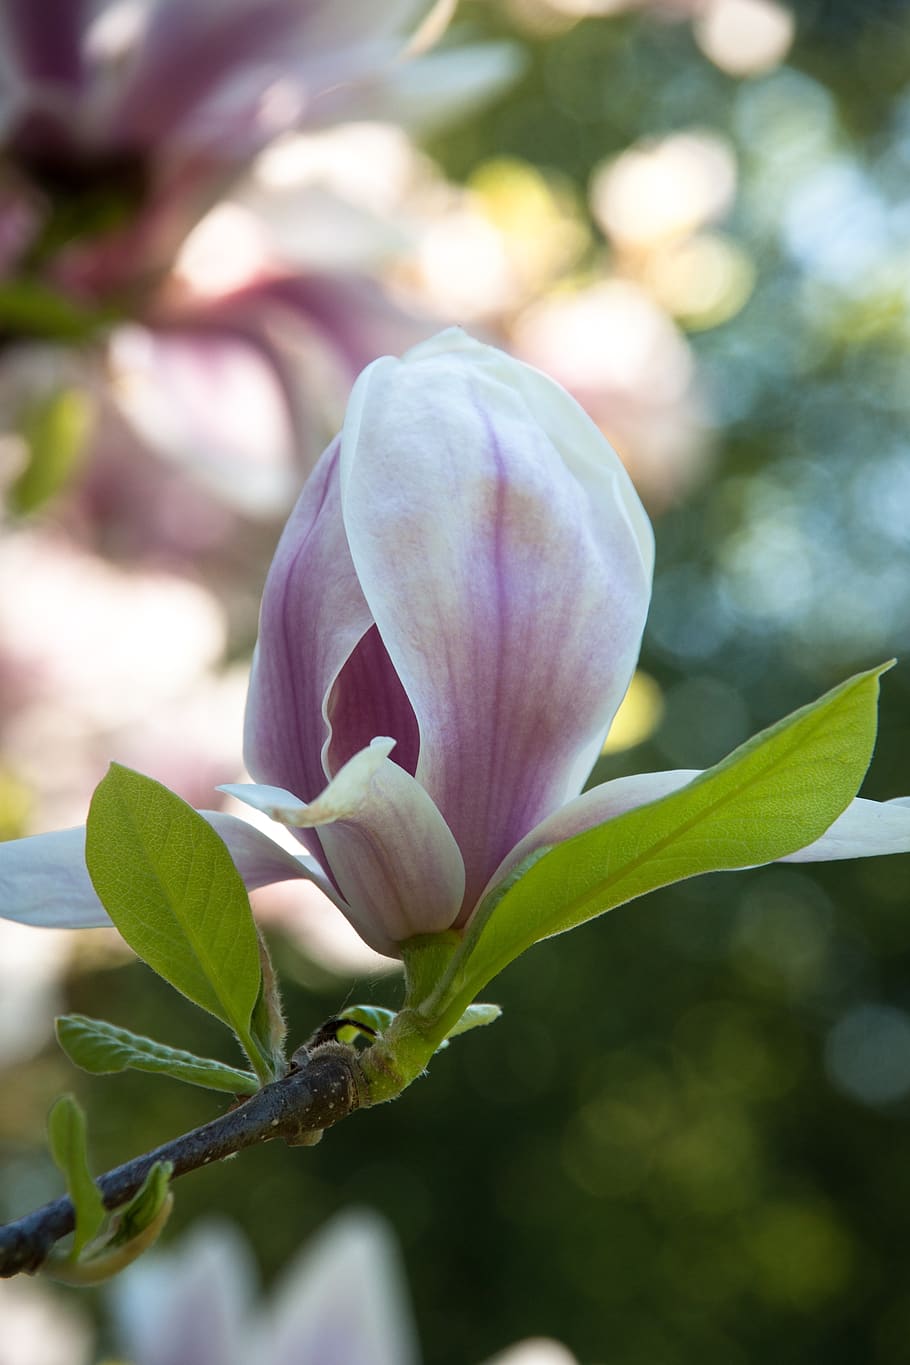 magnolia, branch, blossom, bloom, spring, nature, plant, flowering plant, beauty in nature, flower